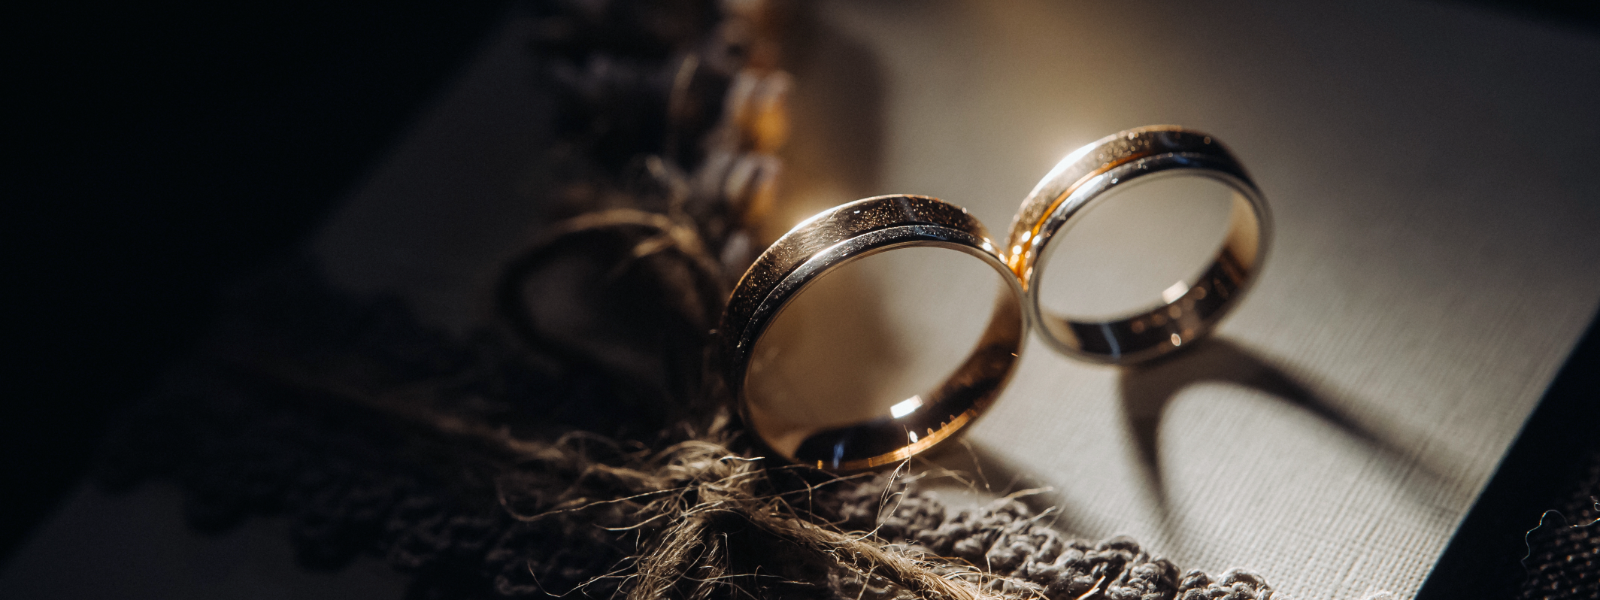 KULDKROON OÜ - We offer an extensive selection of high-quality wedding and engagement rings, jewels, and accessories, cat...